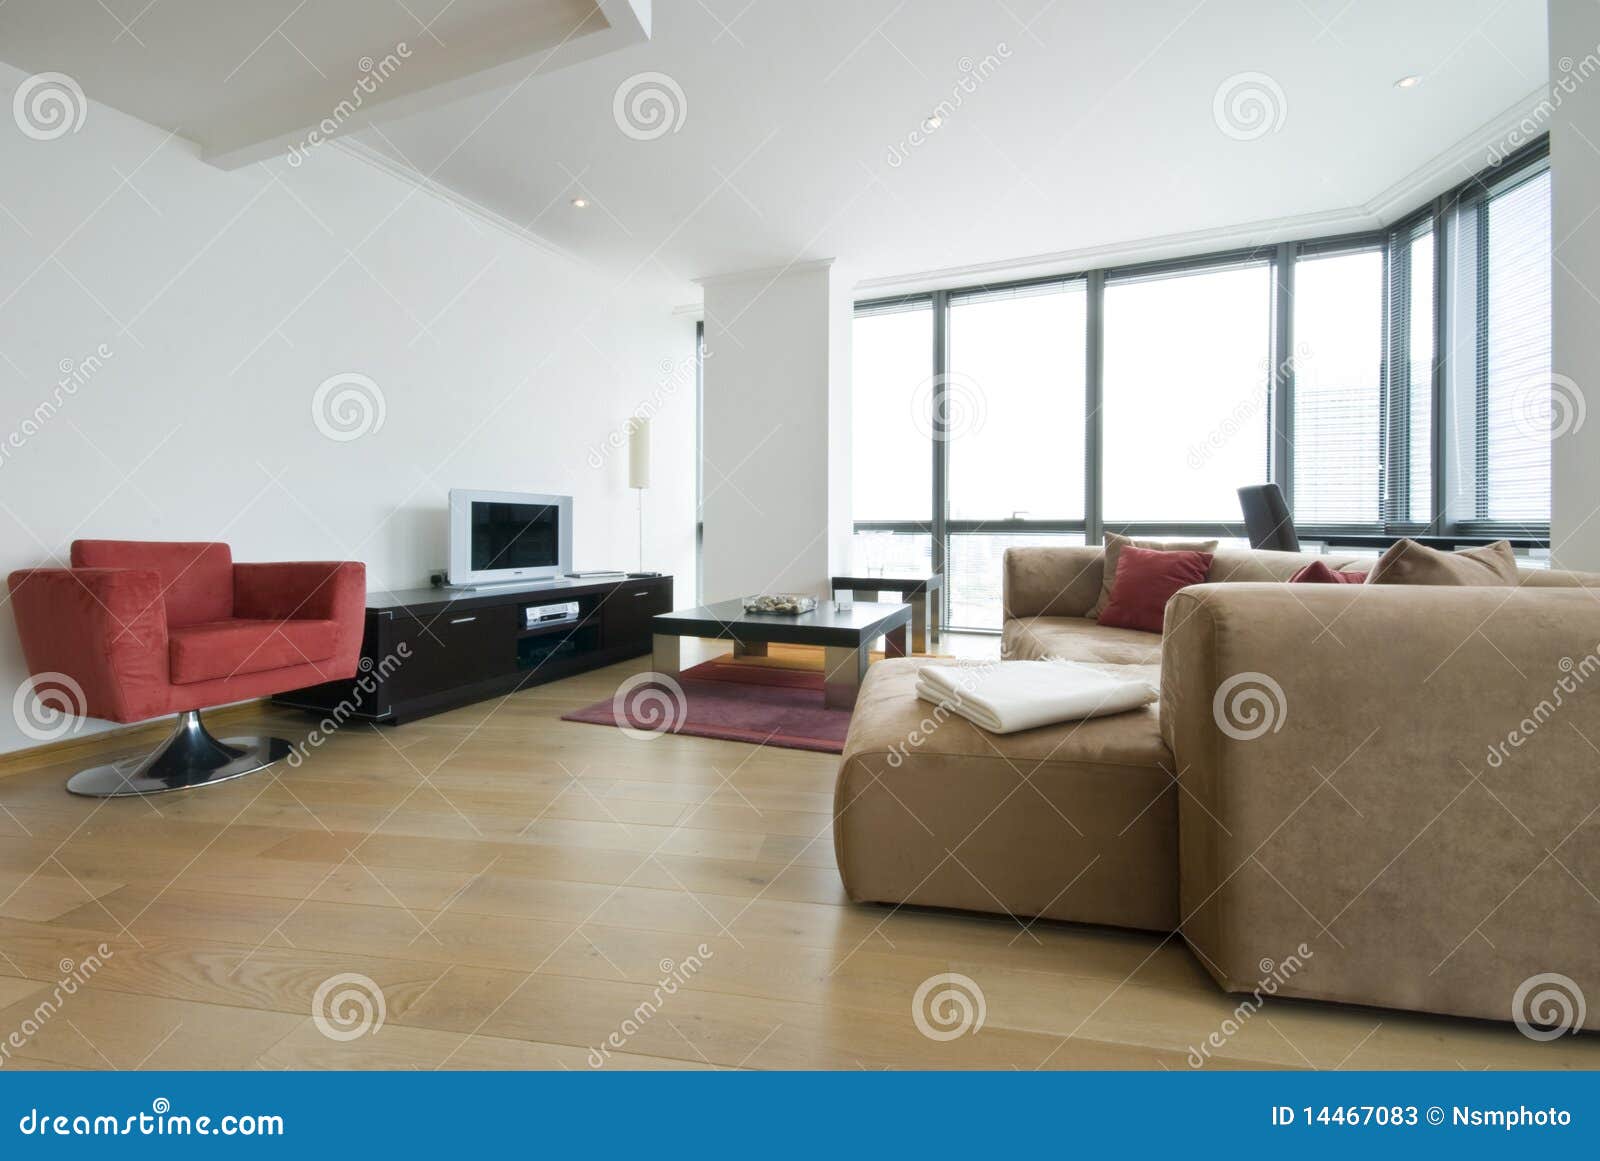 Modern Open Plan Living Room Stock Image - Image of decorative, clean ...